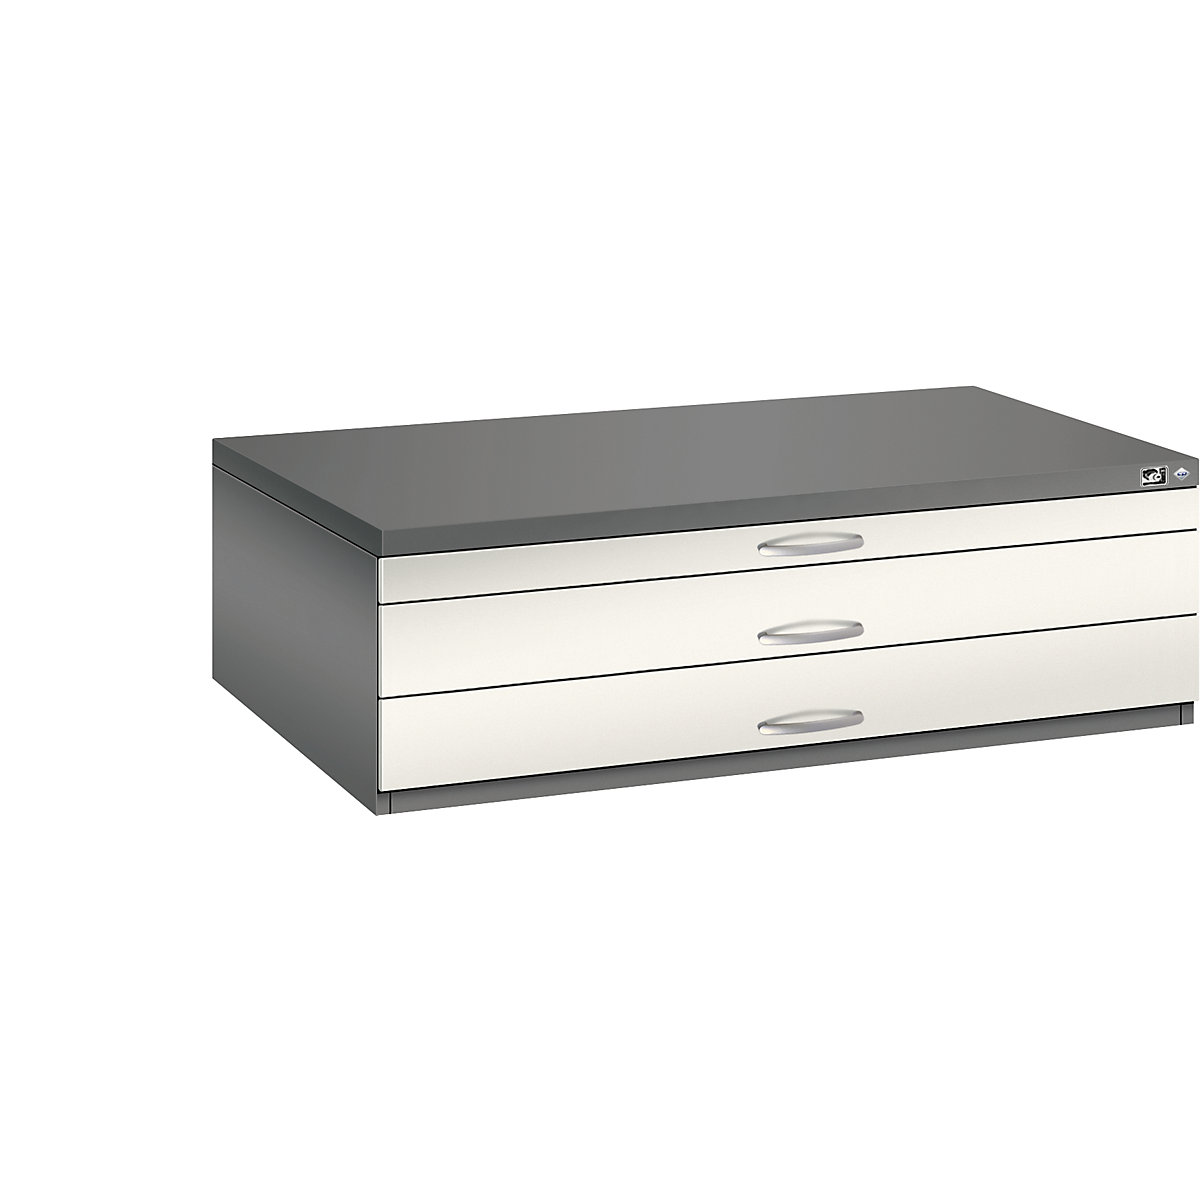 Drawing cabinet – C+P, A0, 3 drawers, height 420 mm, volcanic grey / oyster white-18